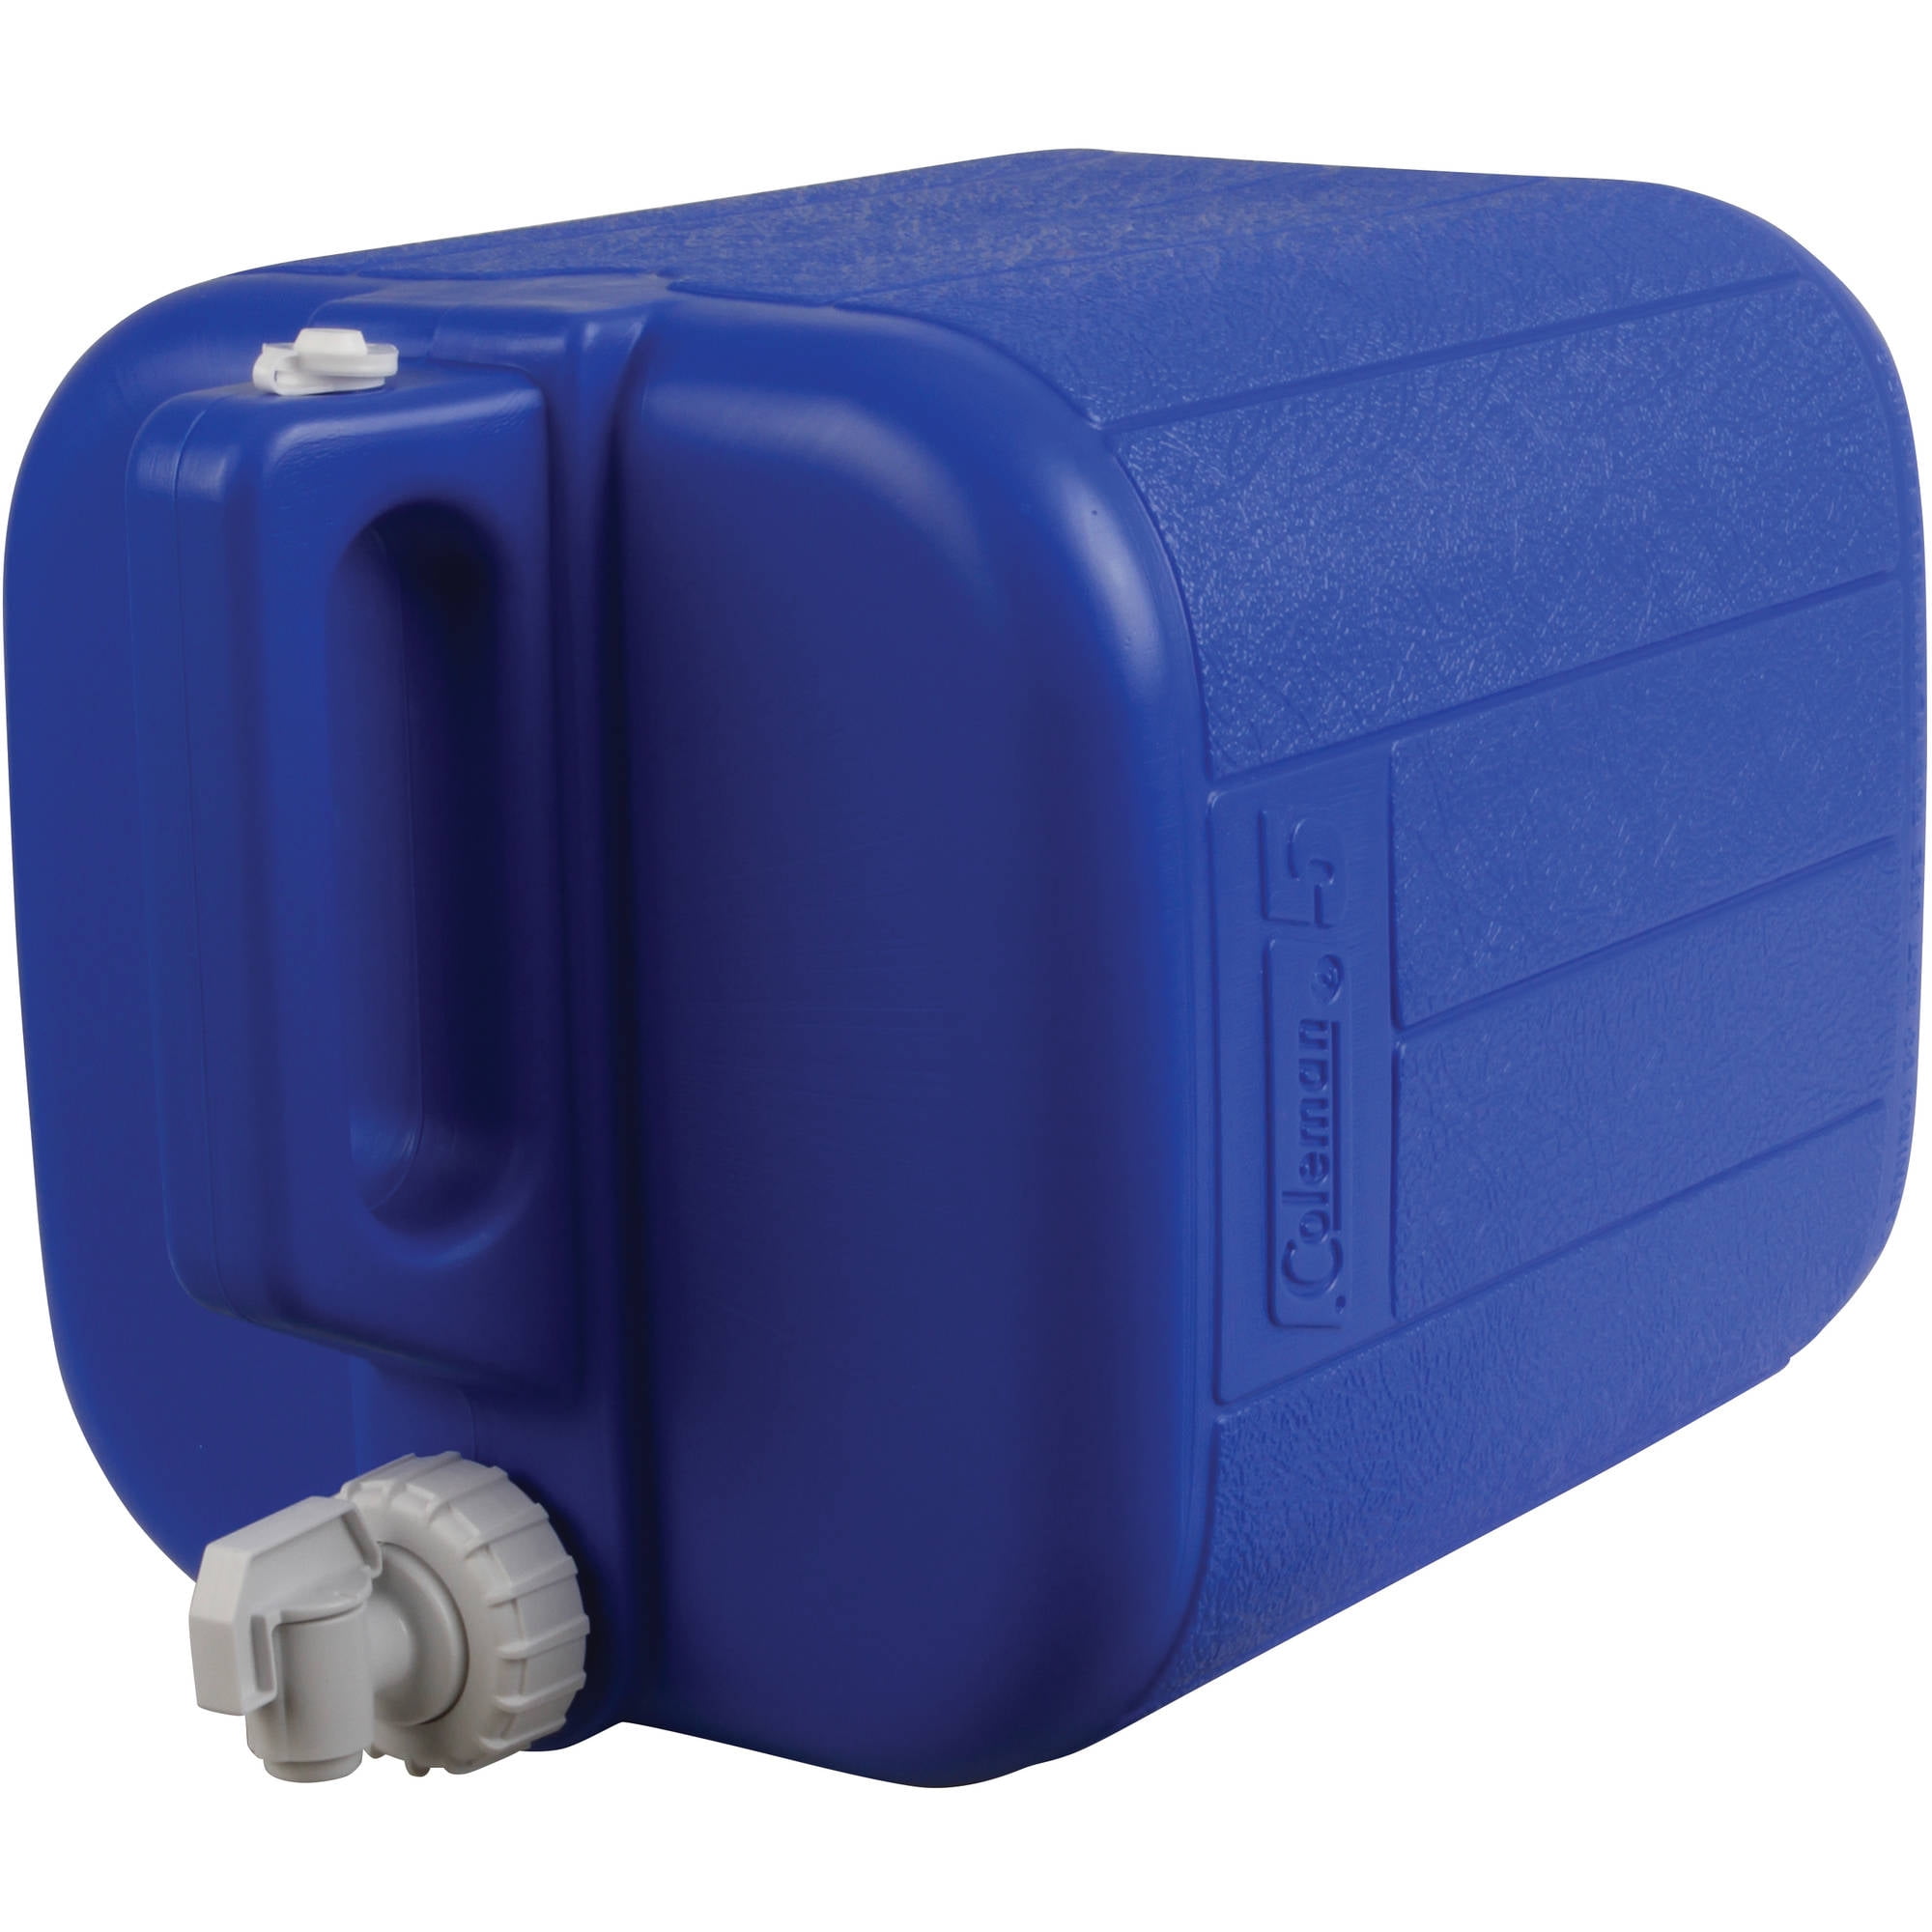 Coleman Water Carrier - Blue, 5 gal - Fred Meyer